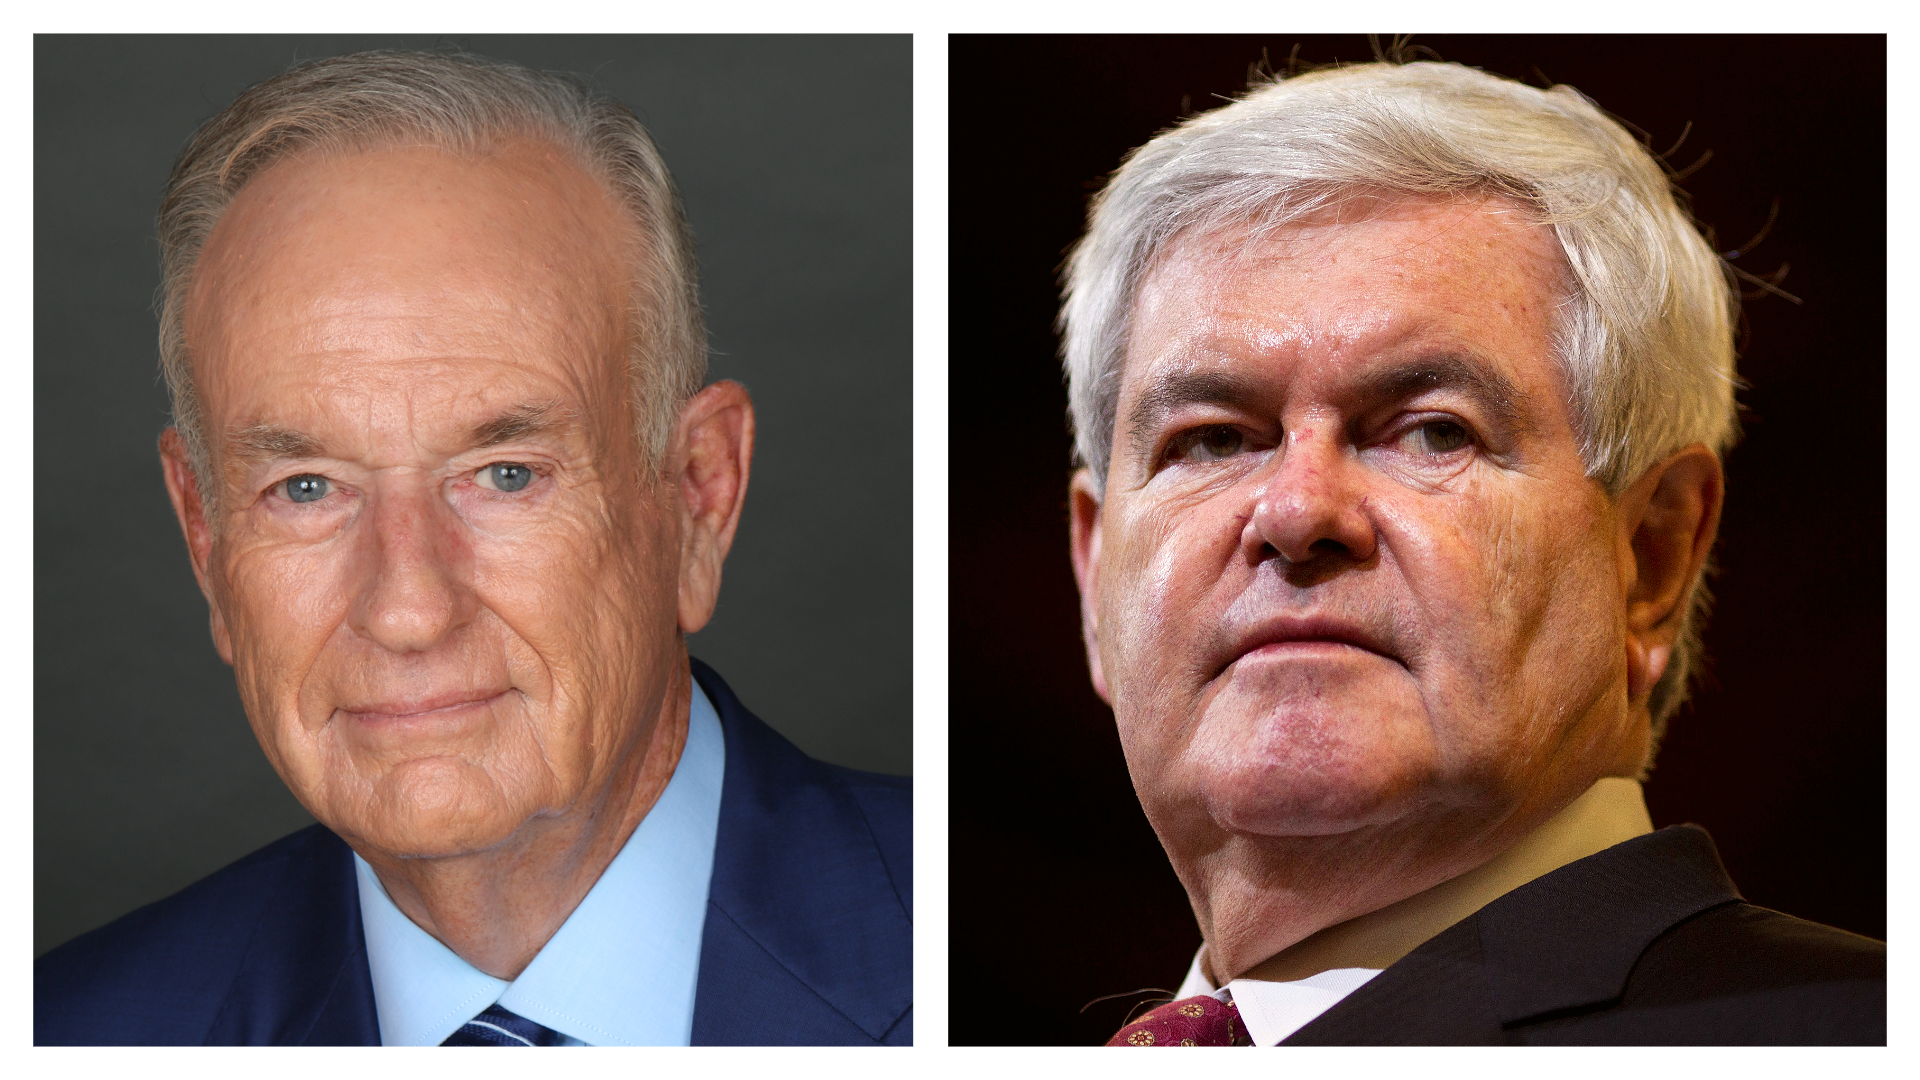 Bill Discusses 'Witches' with Newt Gingrich